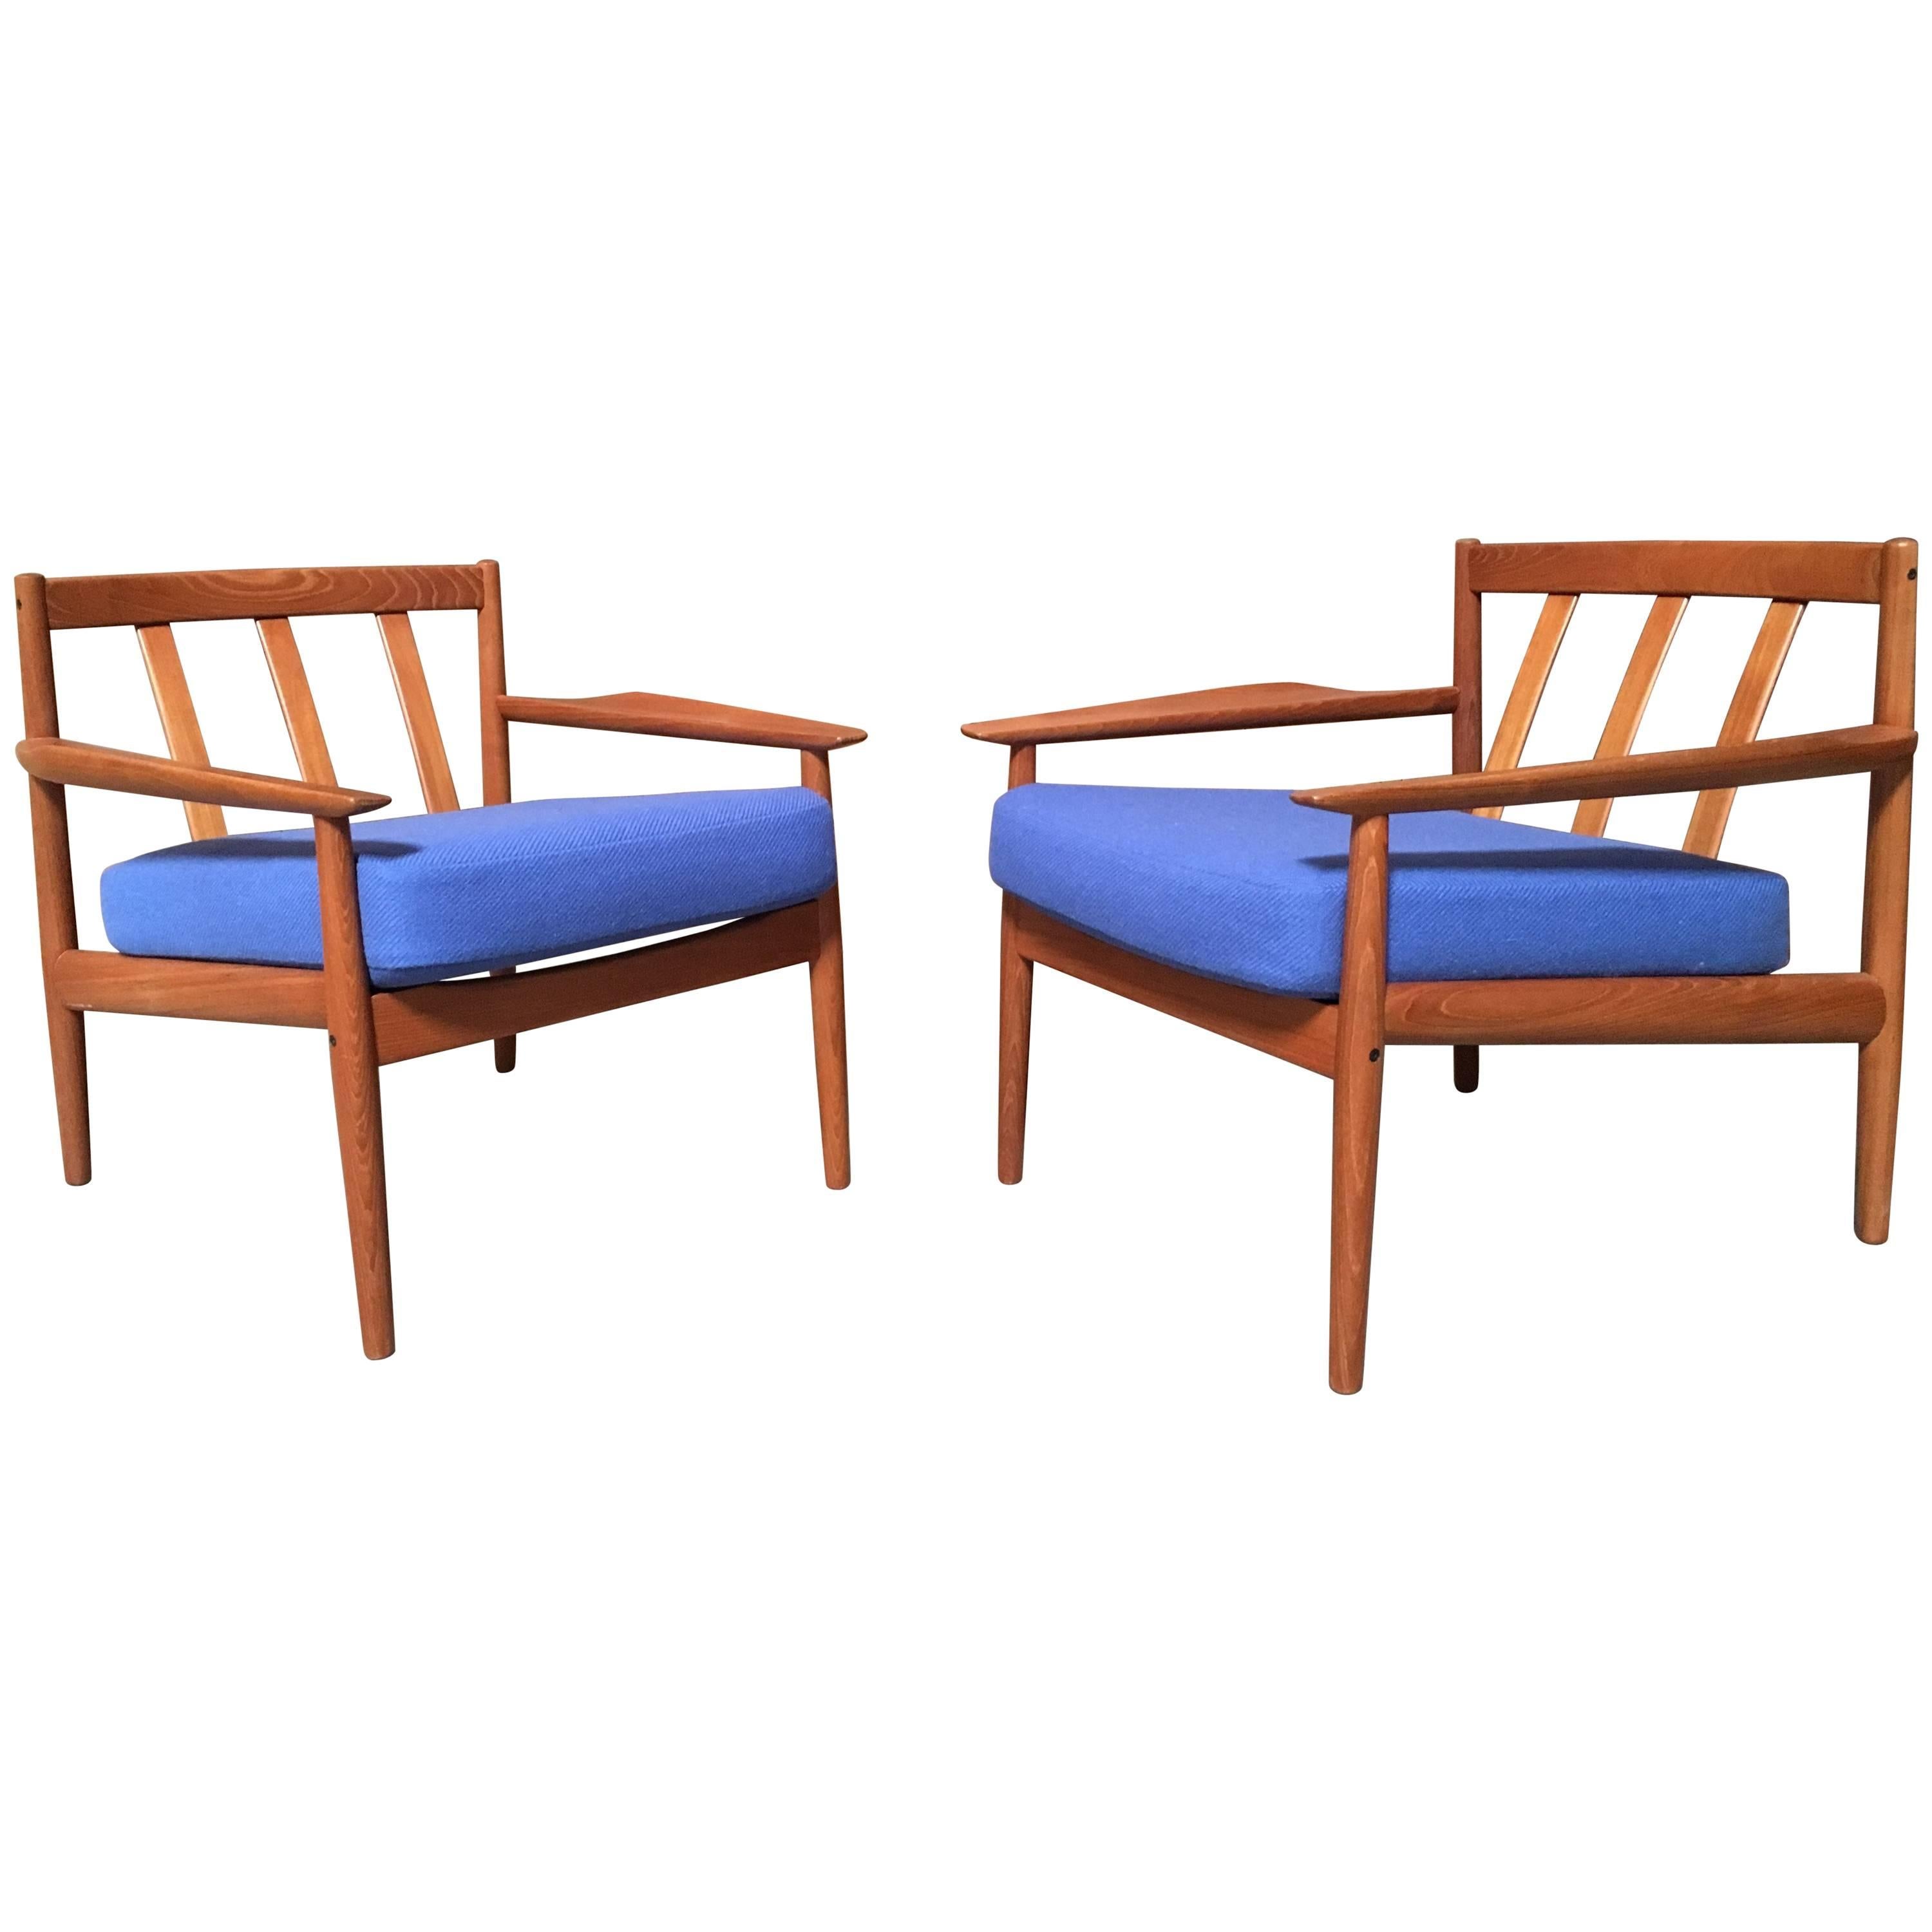 Pair of Danish Modern Lounge Chairs by Arne Vodder